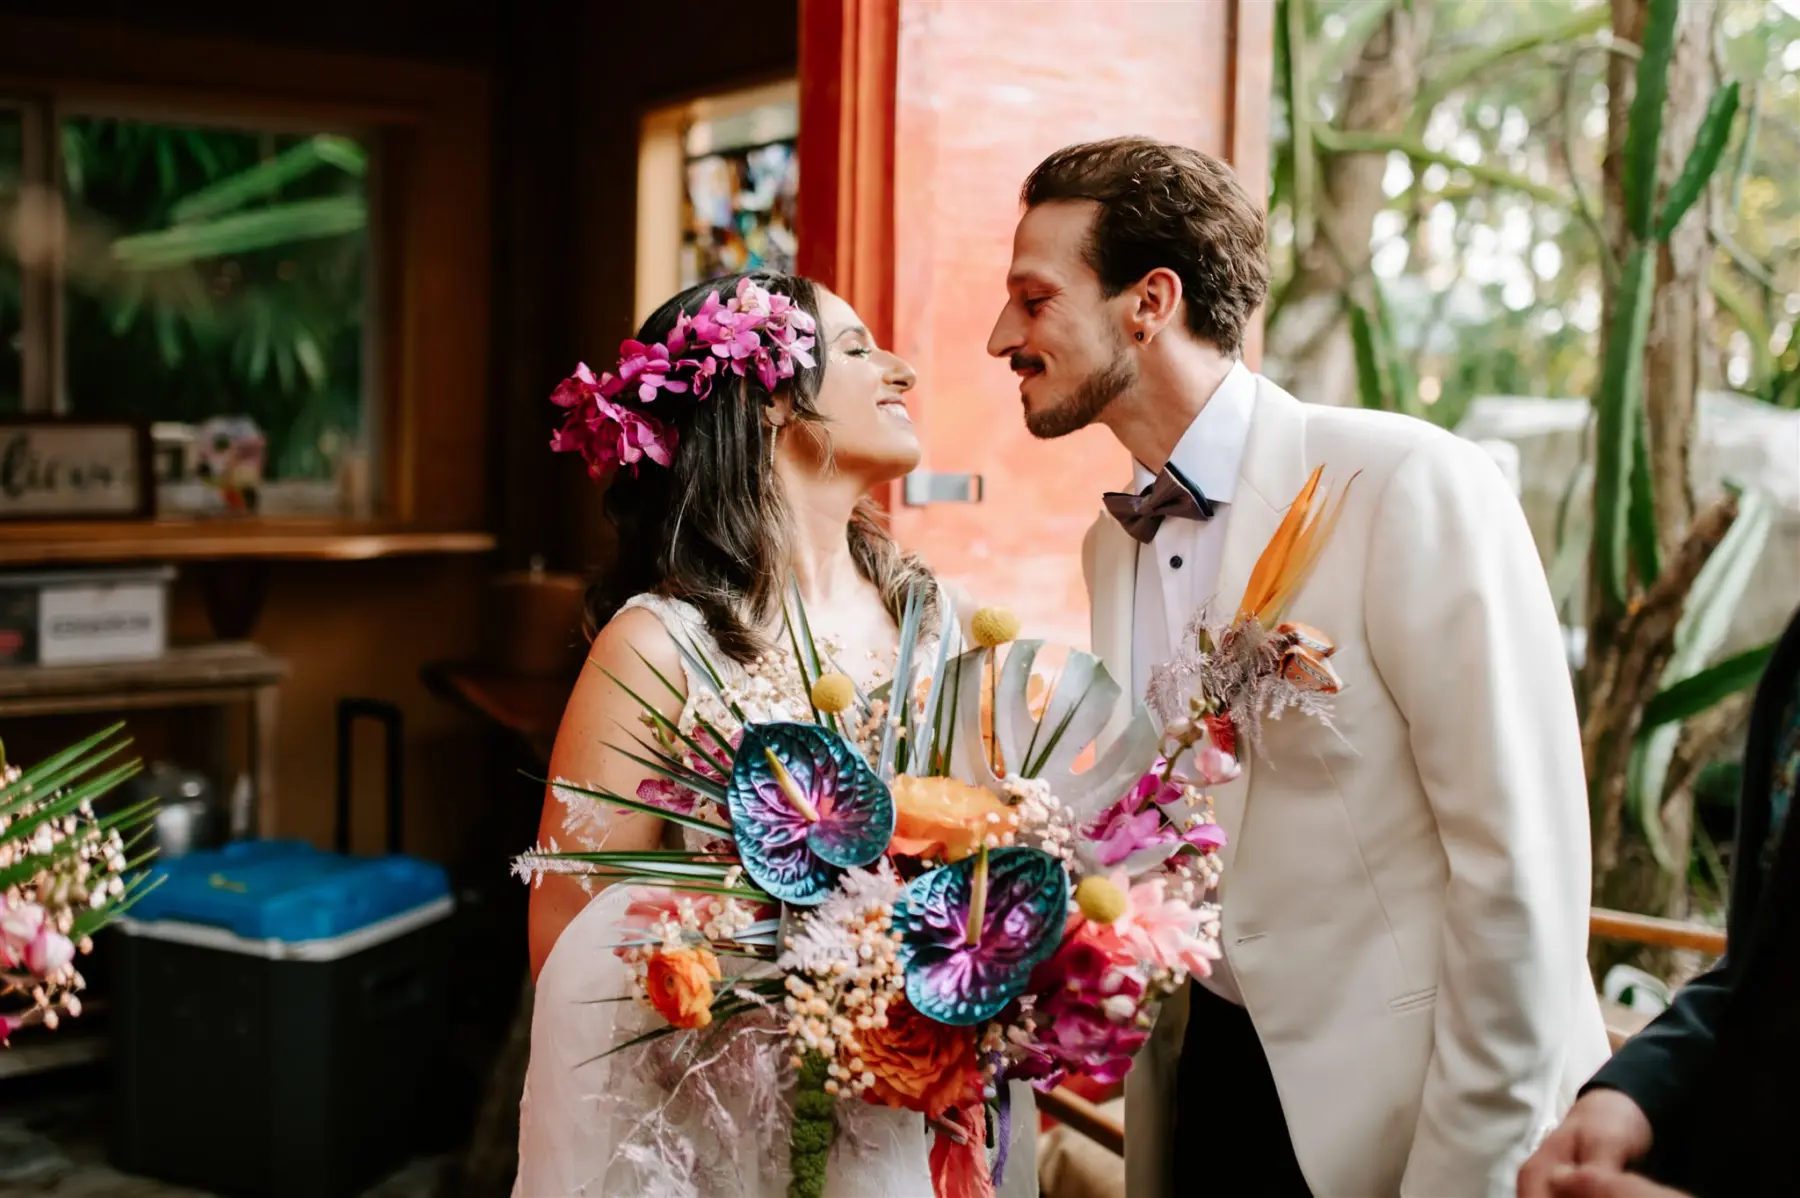 Bride and Groom Just Married Wedding Portrait | Tropical Bridal Bouquet Inspiration | Blue and Purple Anthurium, Monstera, Bird Of Paradise, Bougainvillea and Palm Lead Floral Arrangement Ideas | St. Pete Planner Wilder Mind Events